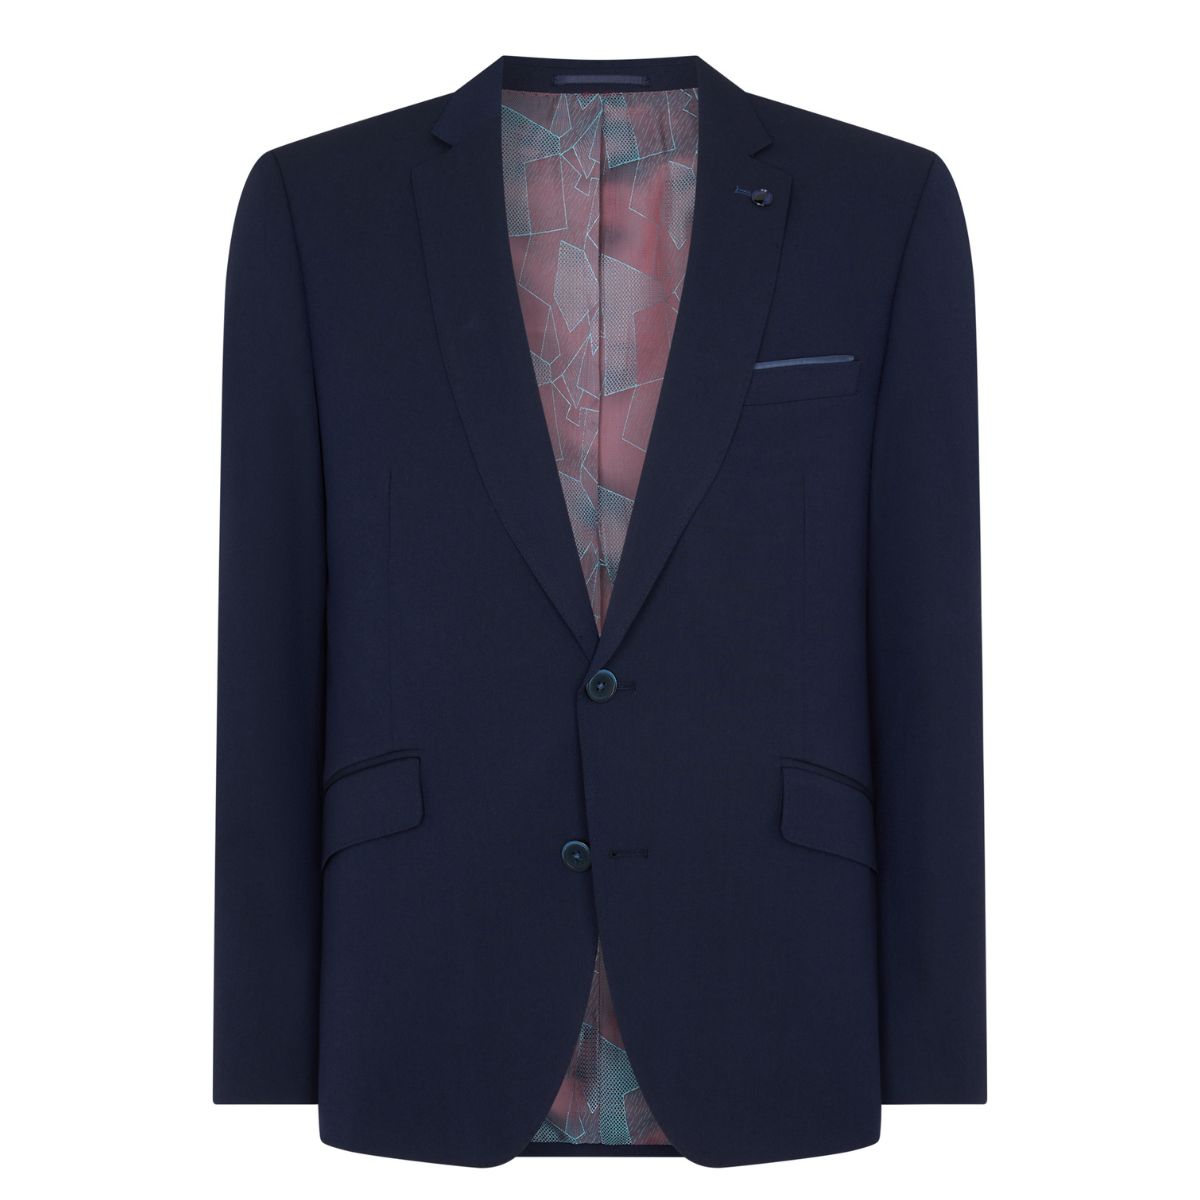 Remus Uomo Tapered Fit Suit Jacket - Navy